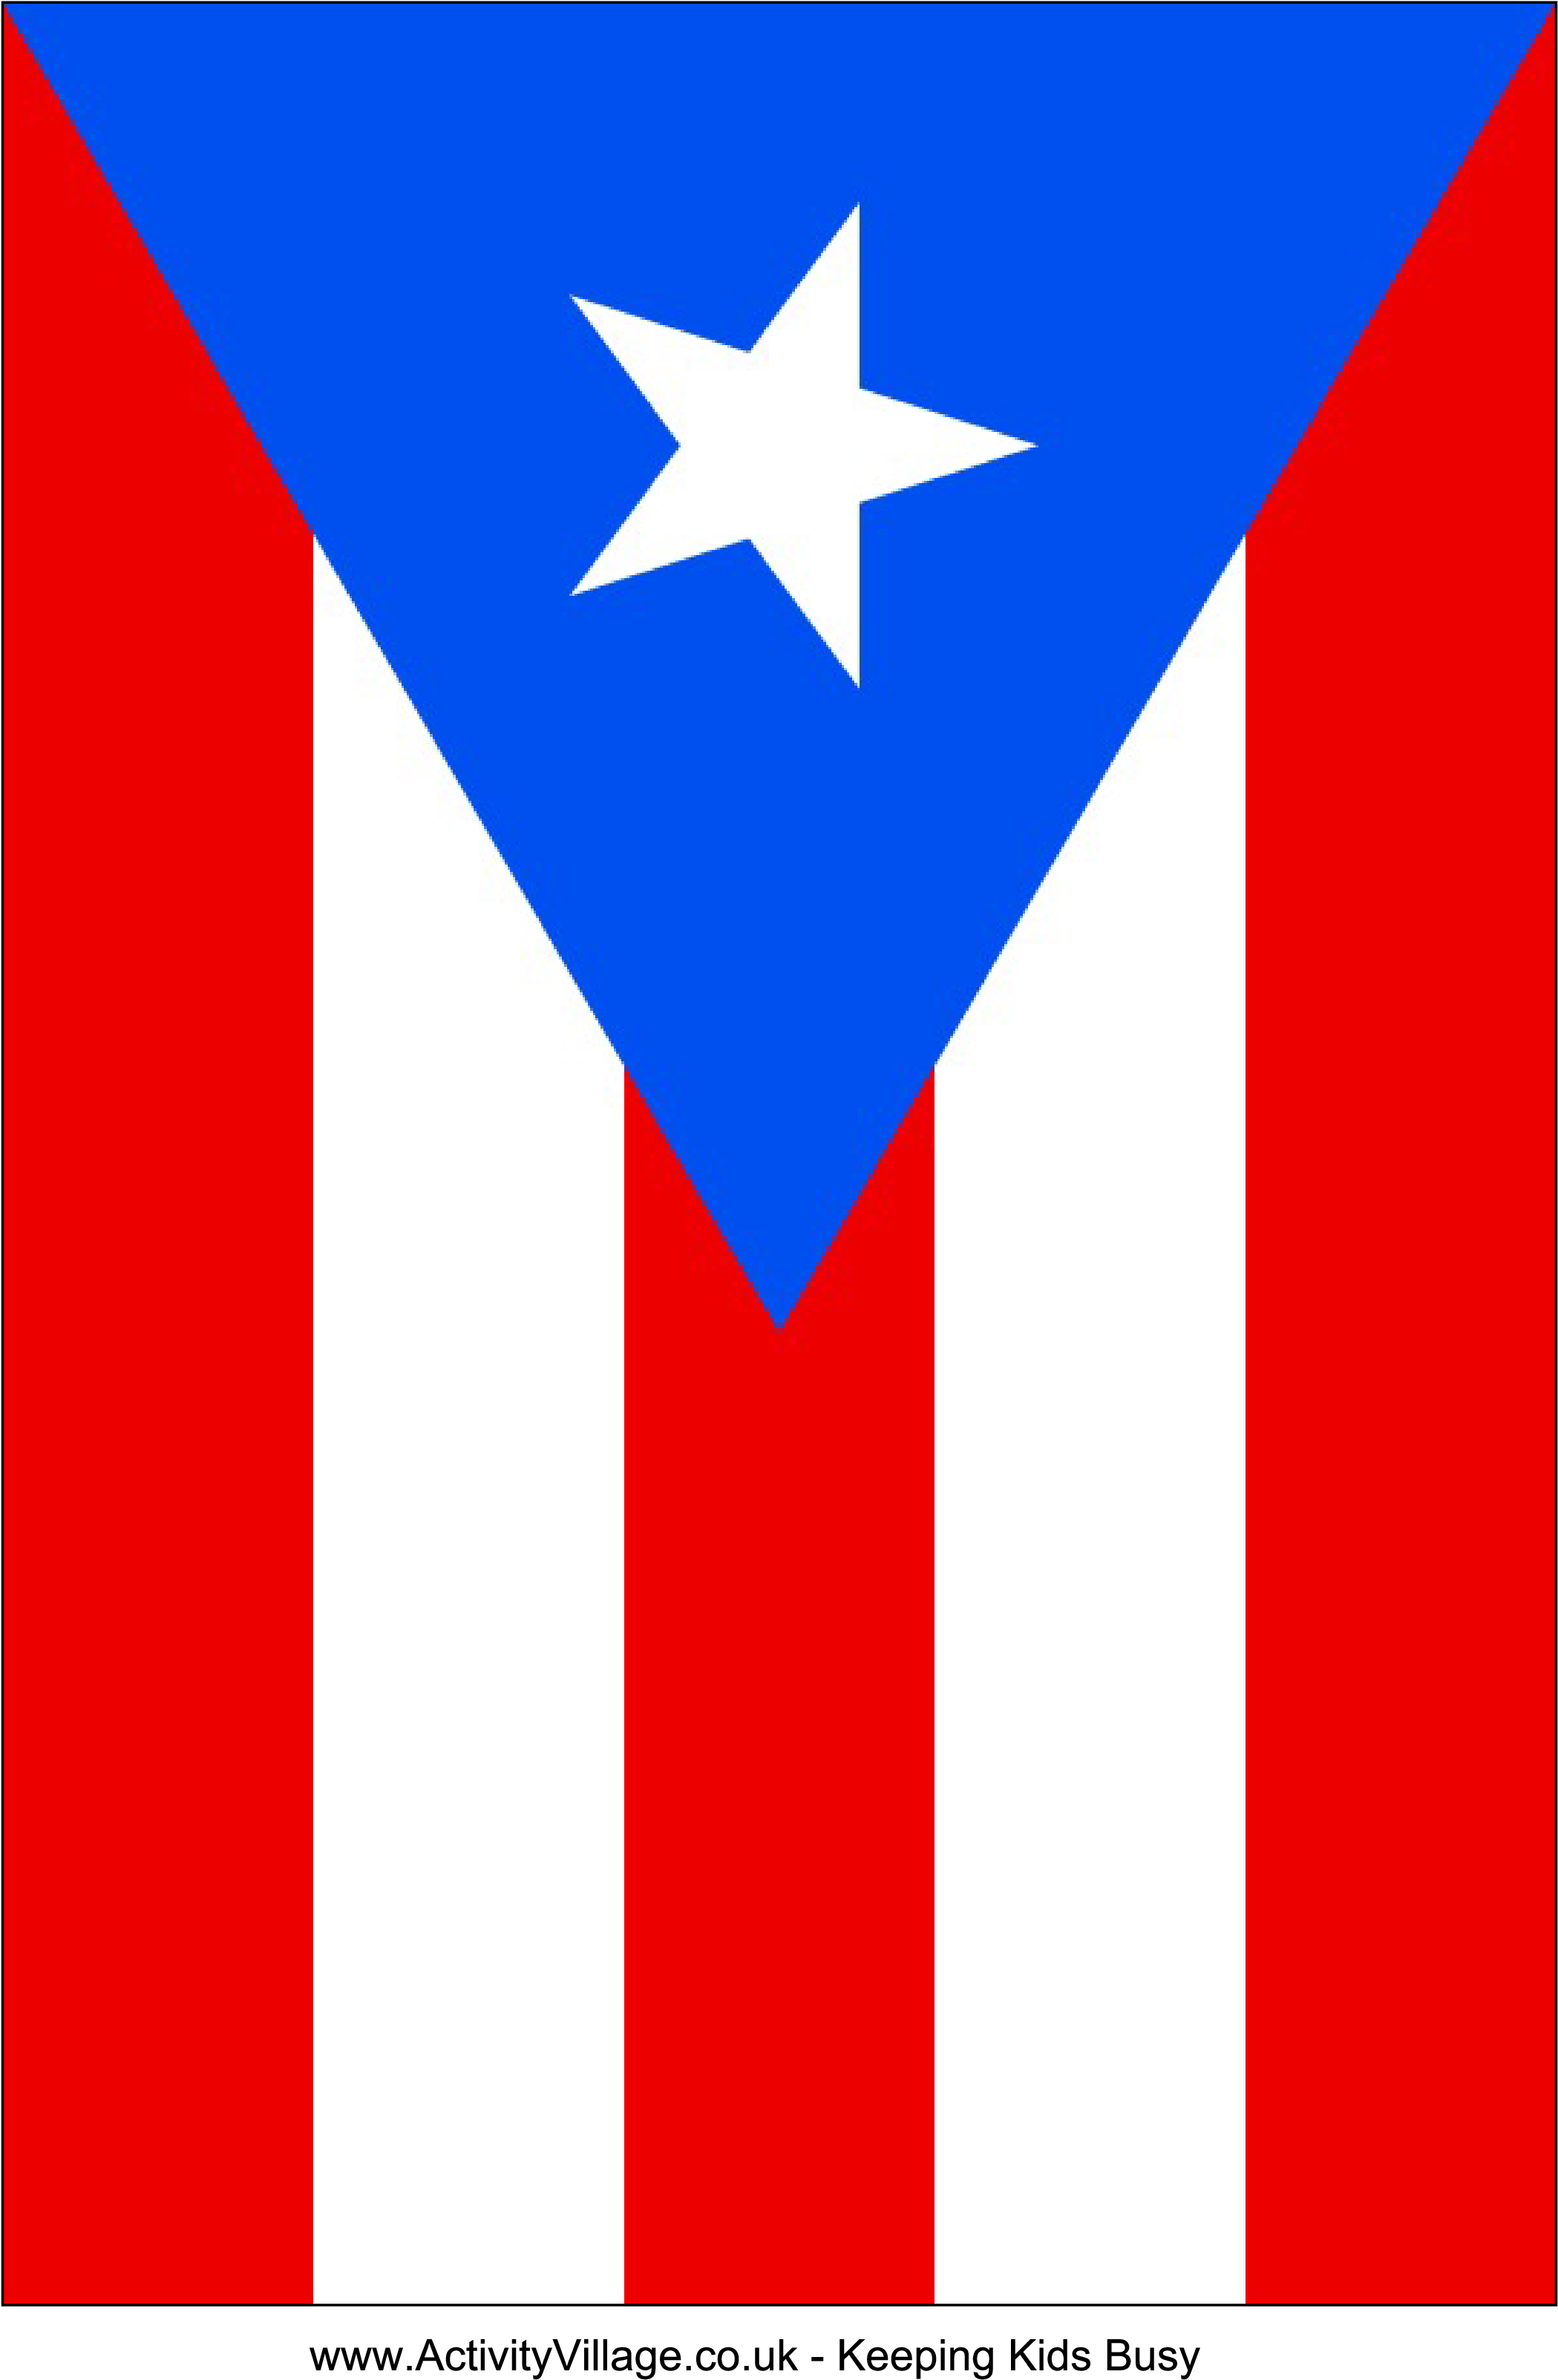 Download This Free Printable Puerto Rico Template A4 - Download This Free P...